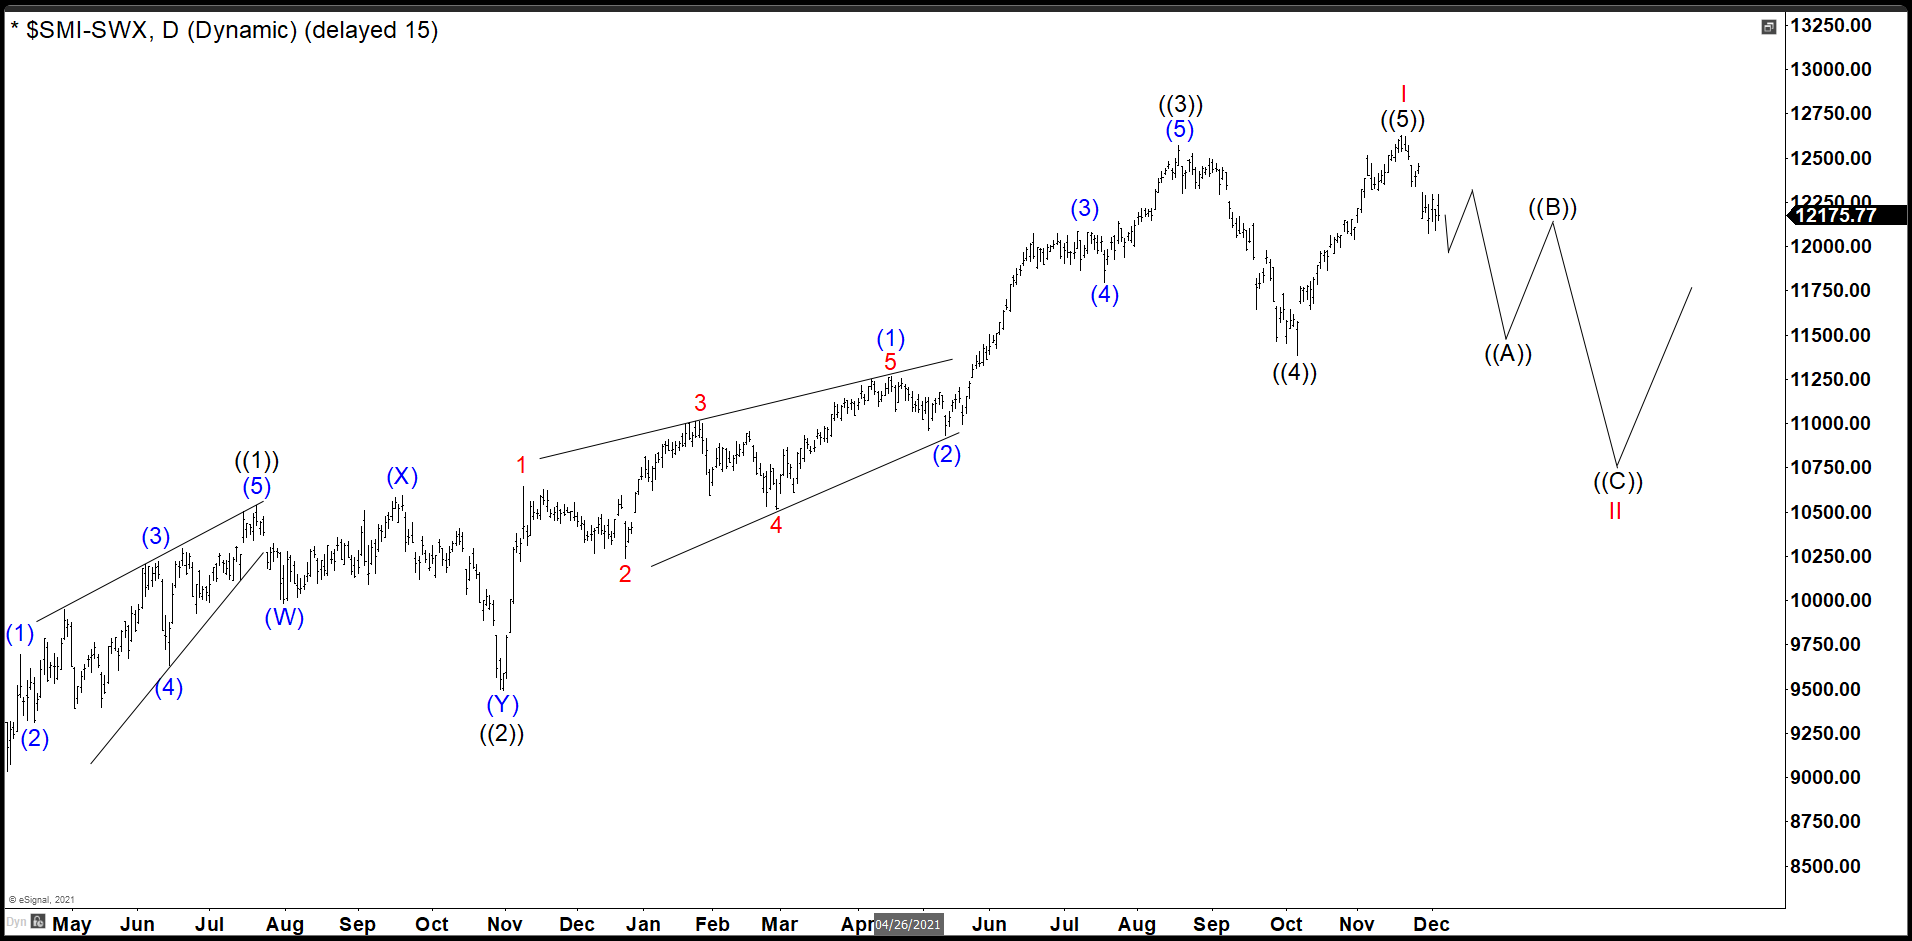 Switzerland Index (SMI) Have Completed An Important Market Cycle.